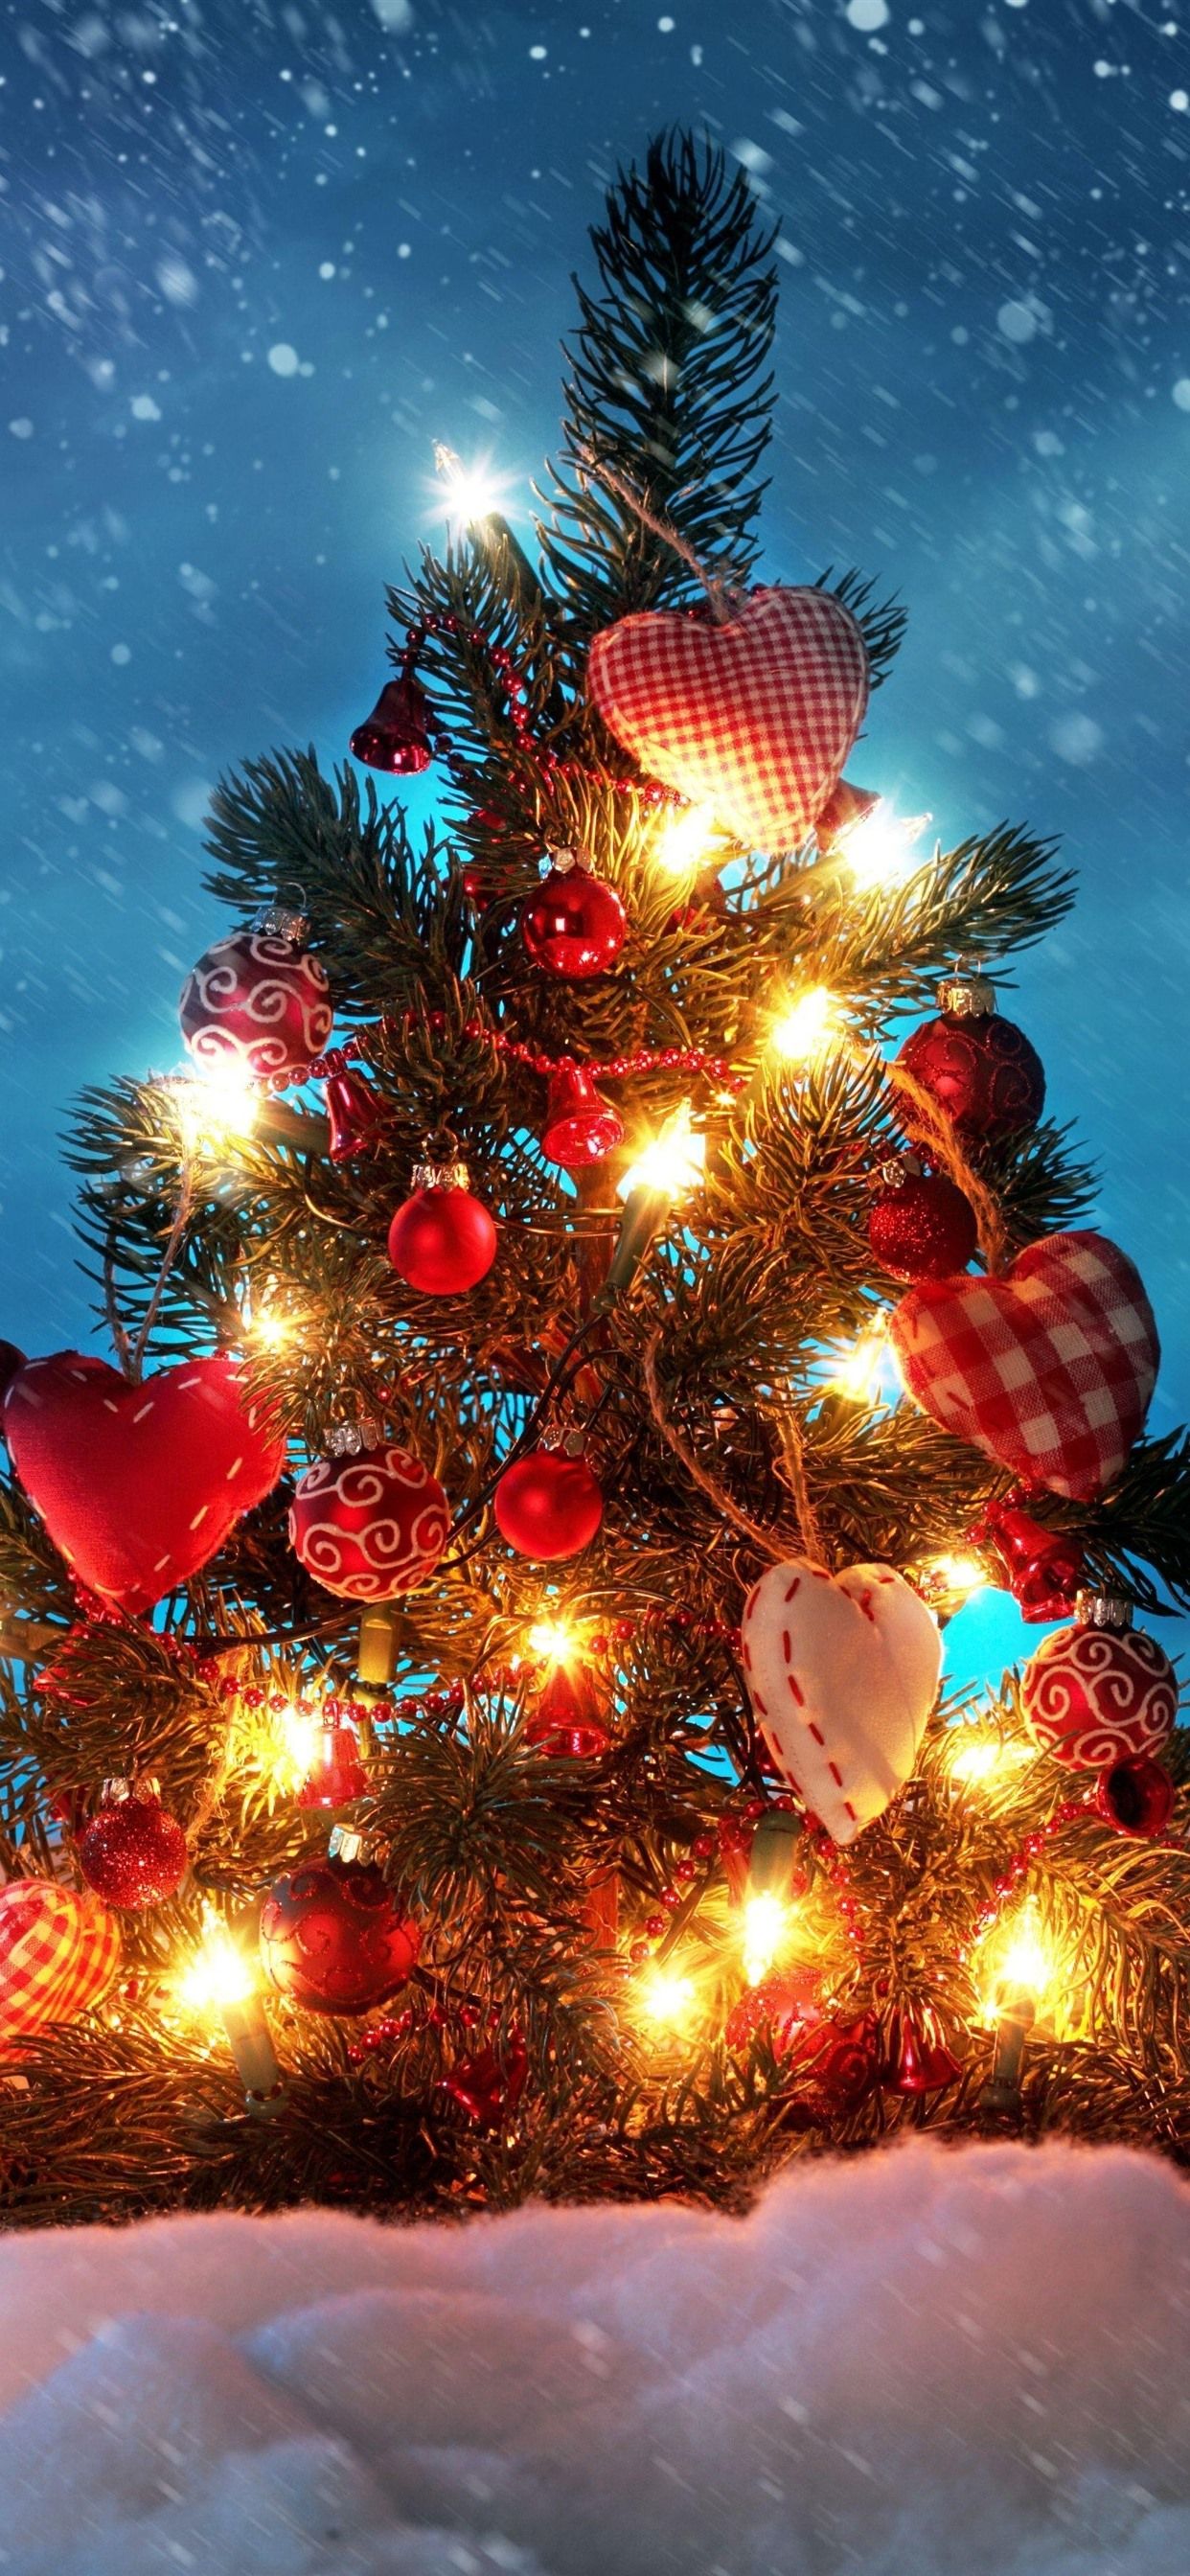 Christmas tree, decoration, lights, snow, winter 1242x2688 iPhone 11 Pro/XS Max wallpaper, background, picture, image